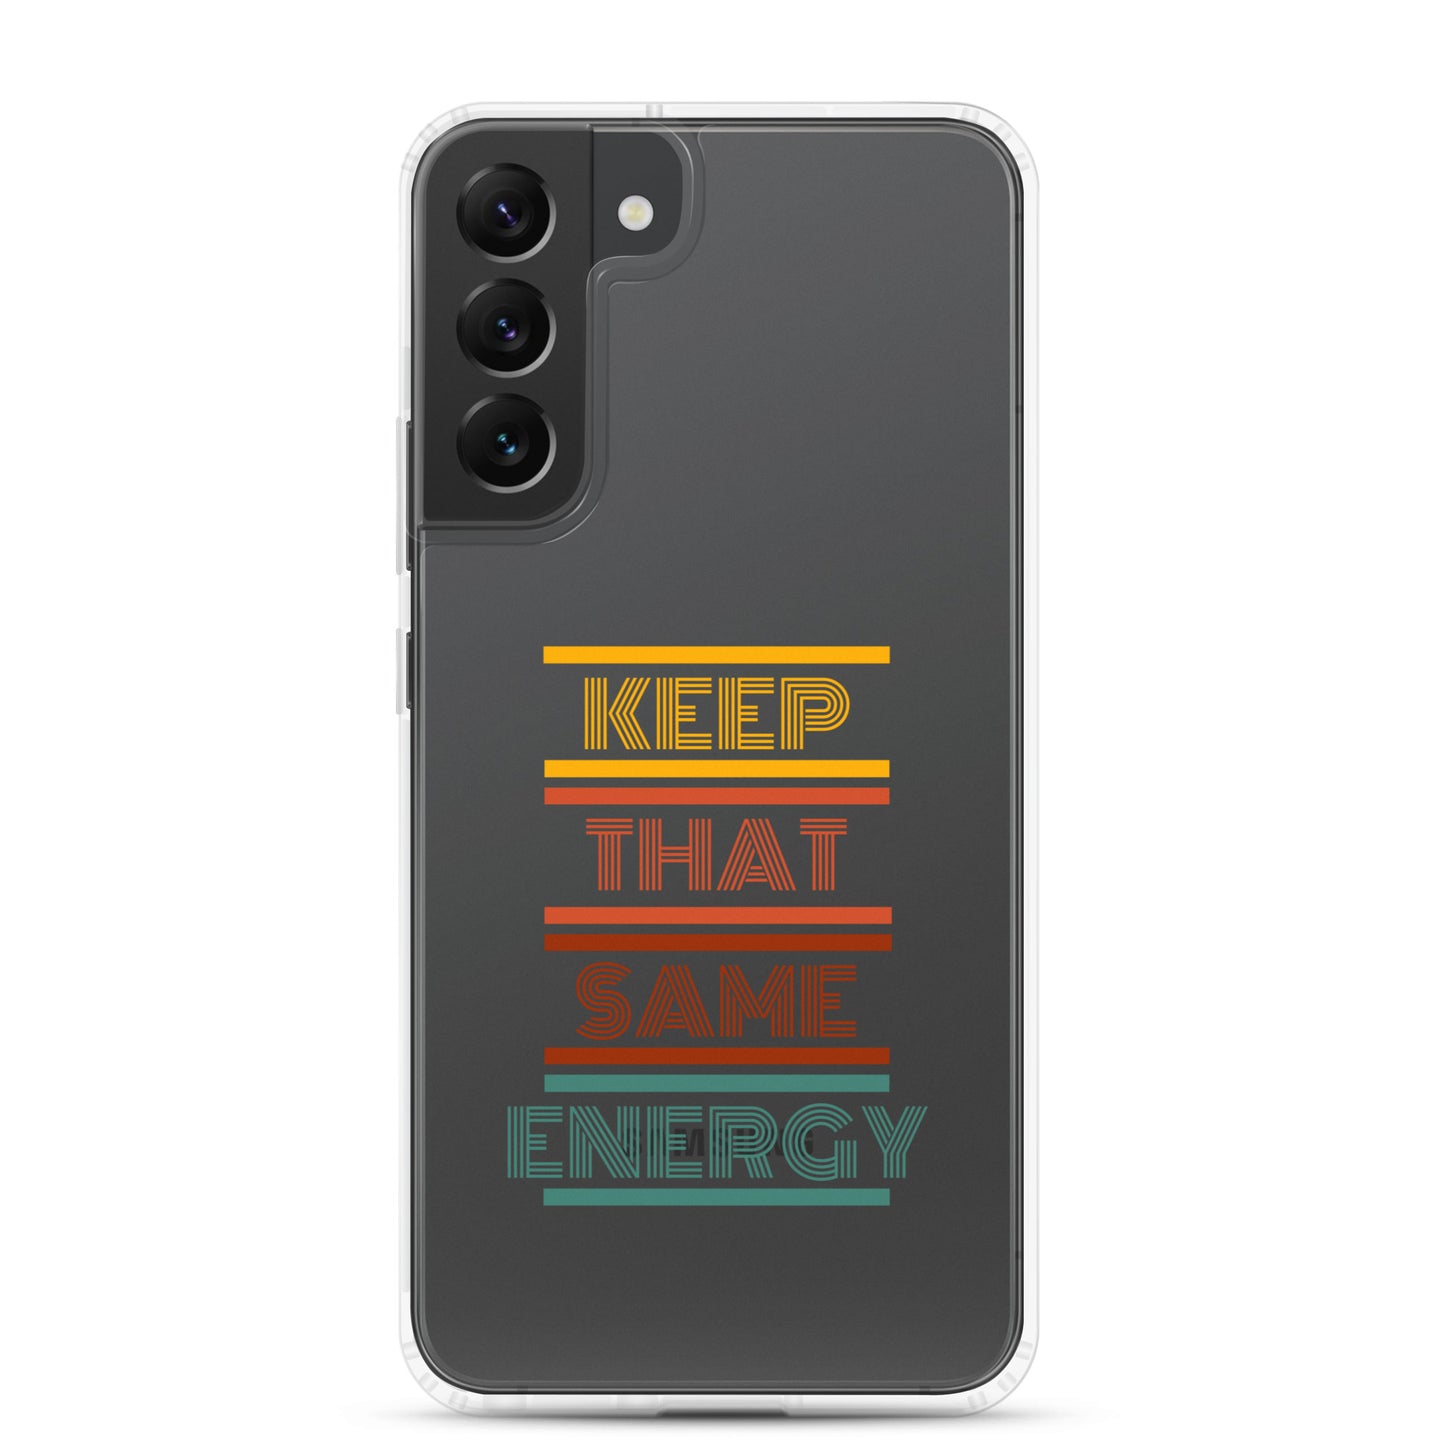 KEEP THAT SAME ENERGY Clear Case for Samsung®